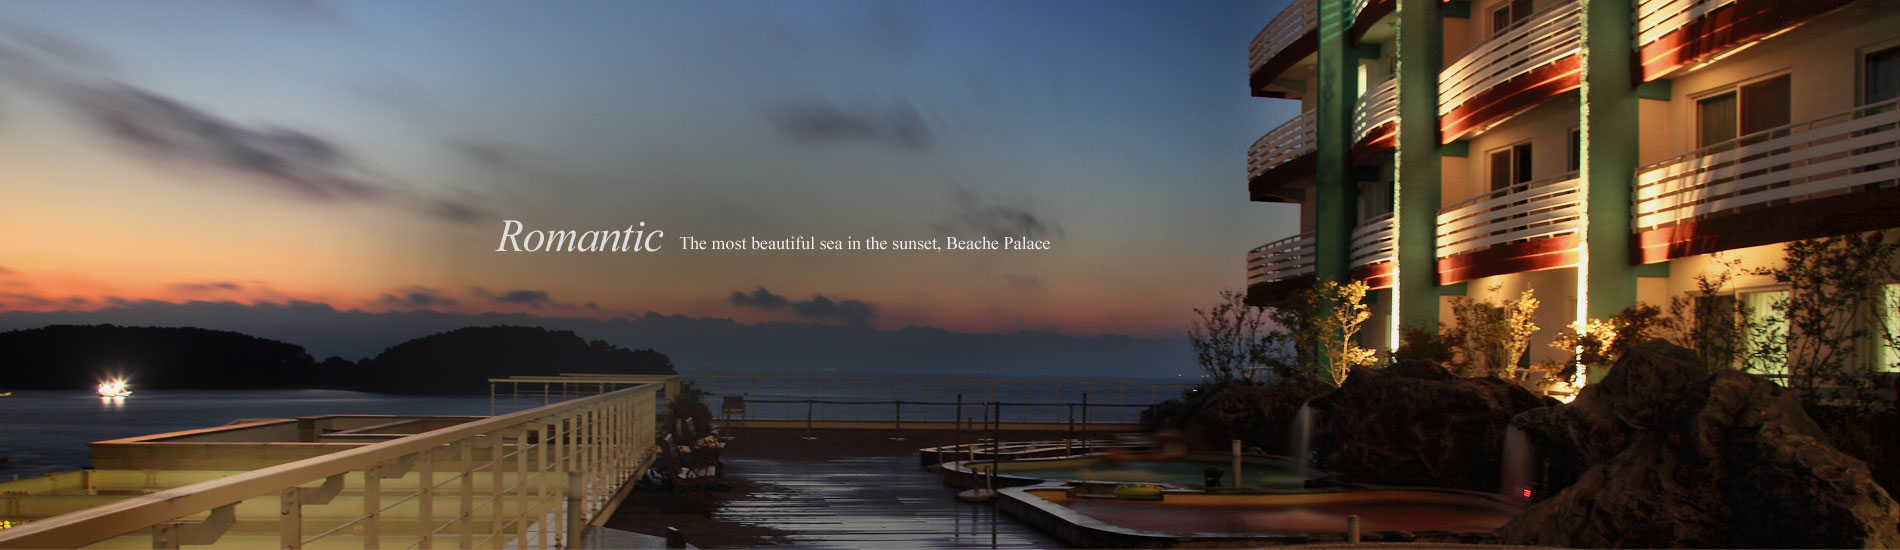 Romantic The most beautiful sea in the sunset, Beache Palace